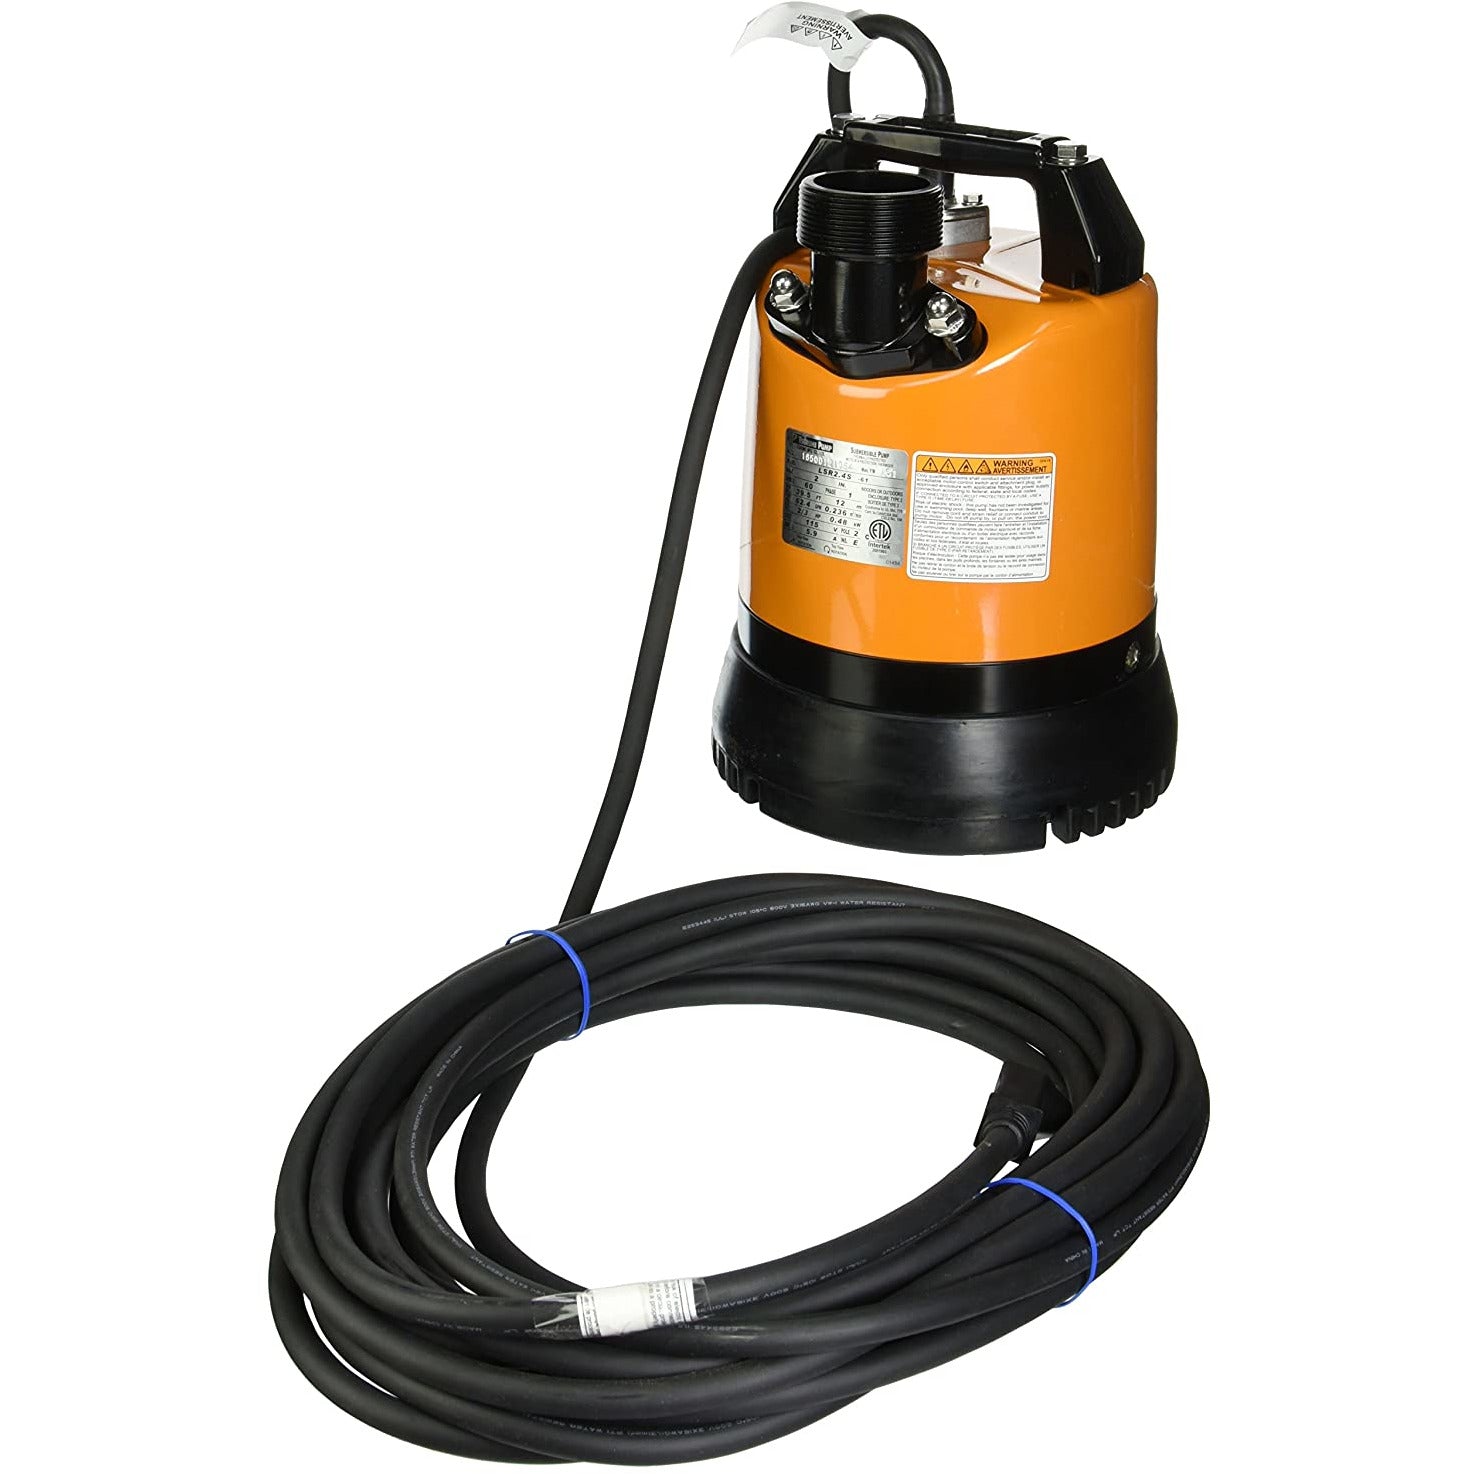 Low-Level Submersible Dewatering Pump